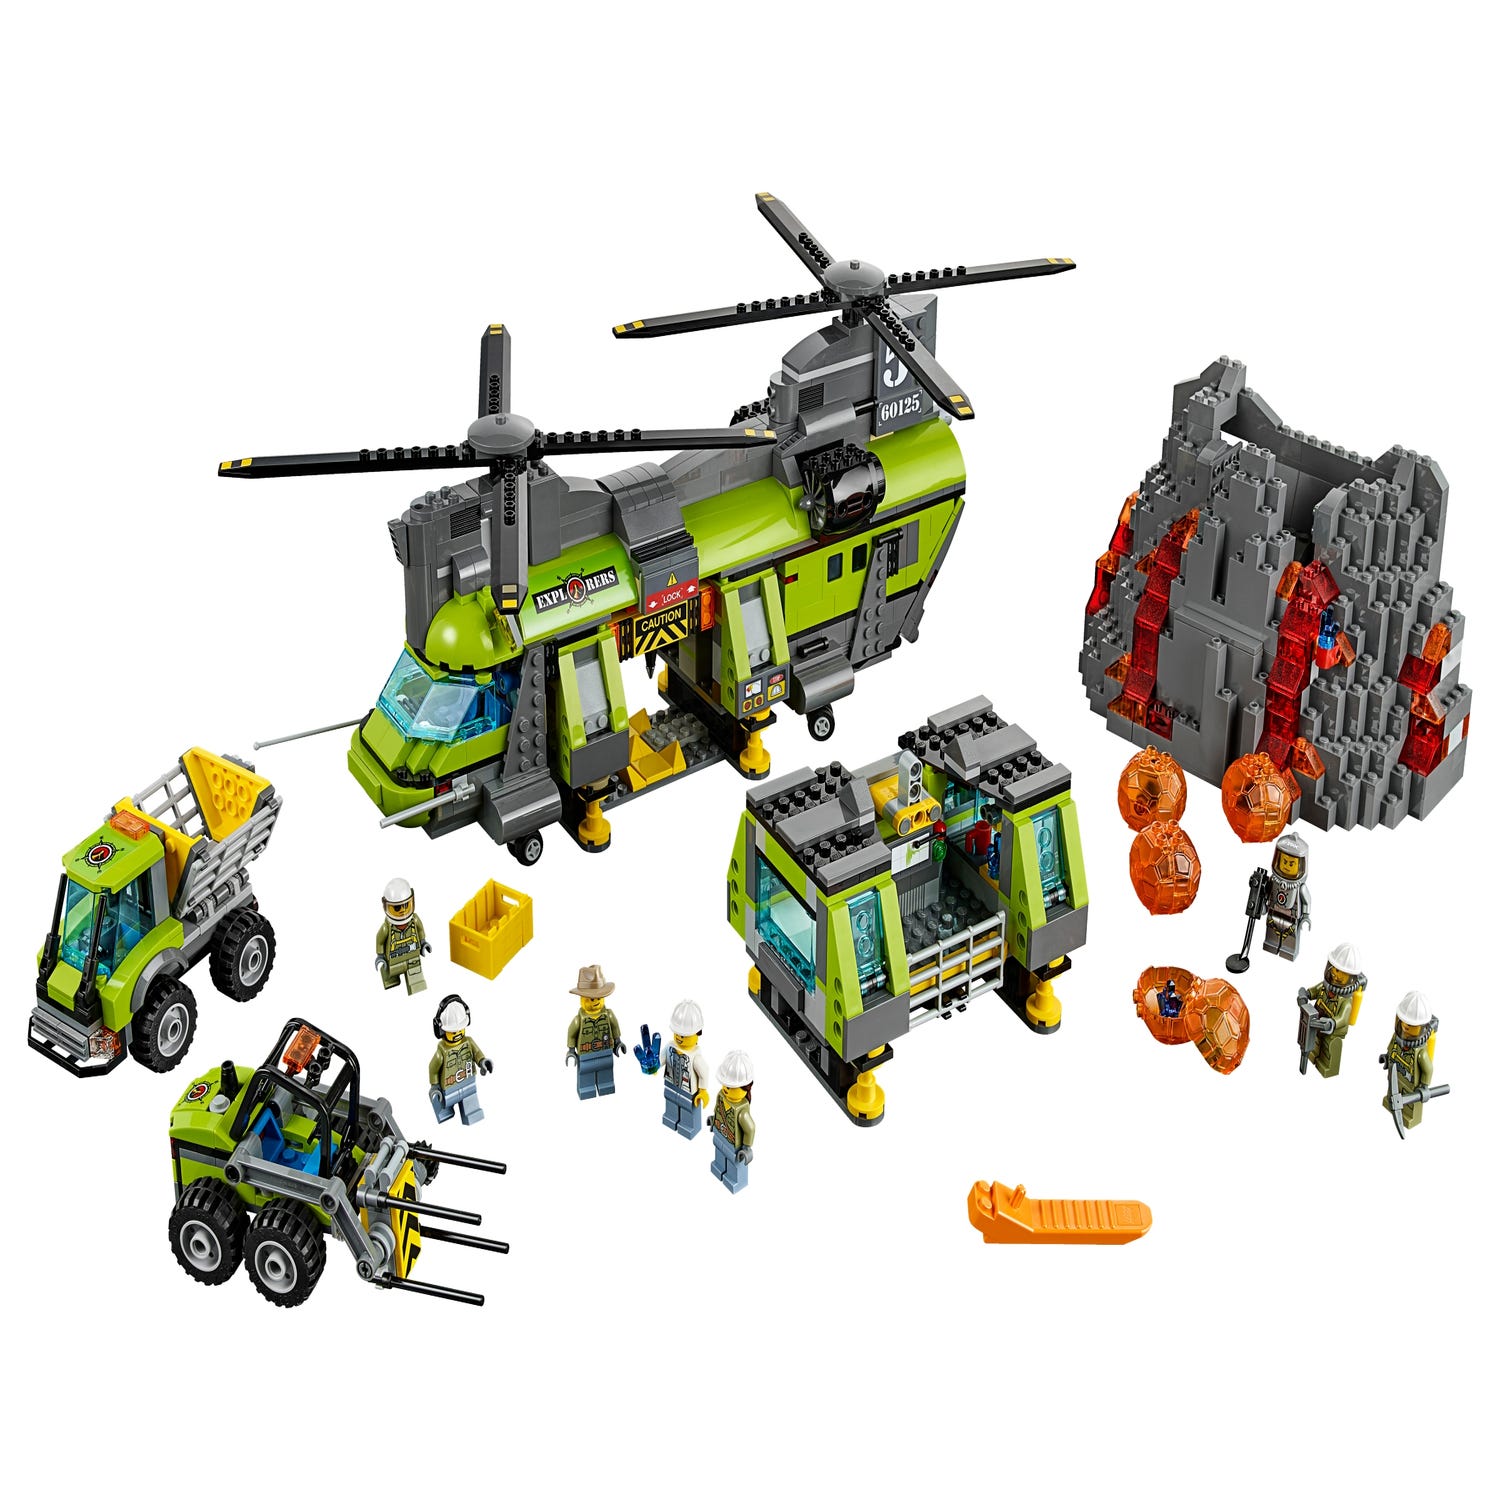 Heavy-lift Helicopter 60125 | City | Buy online at the Shop US